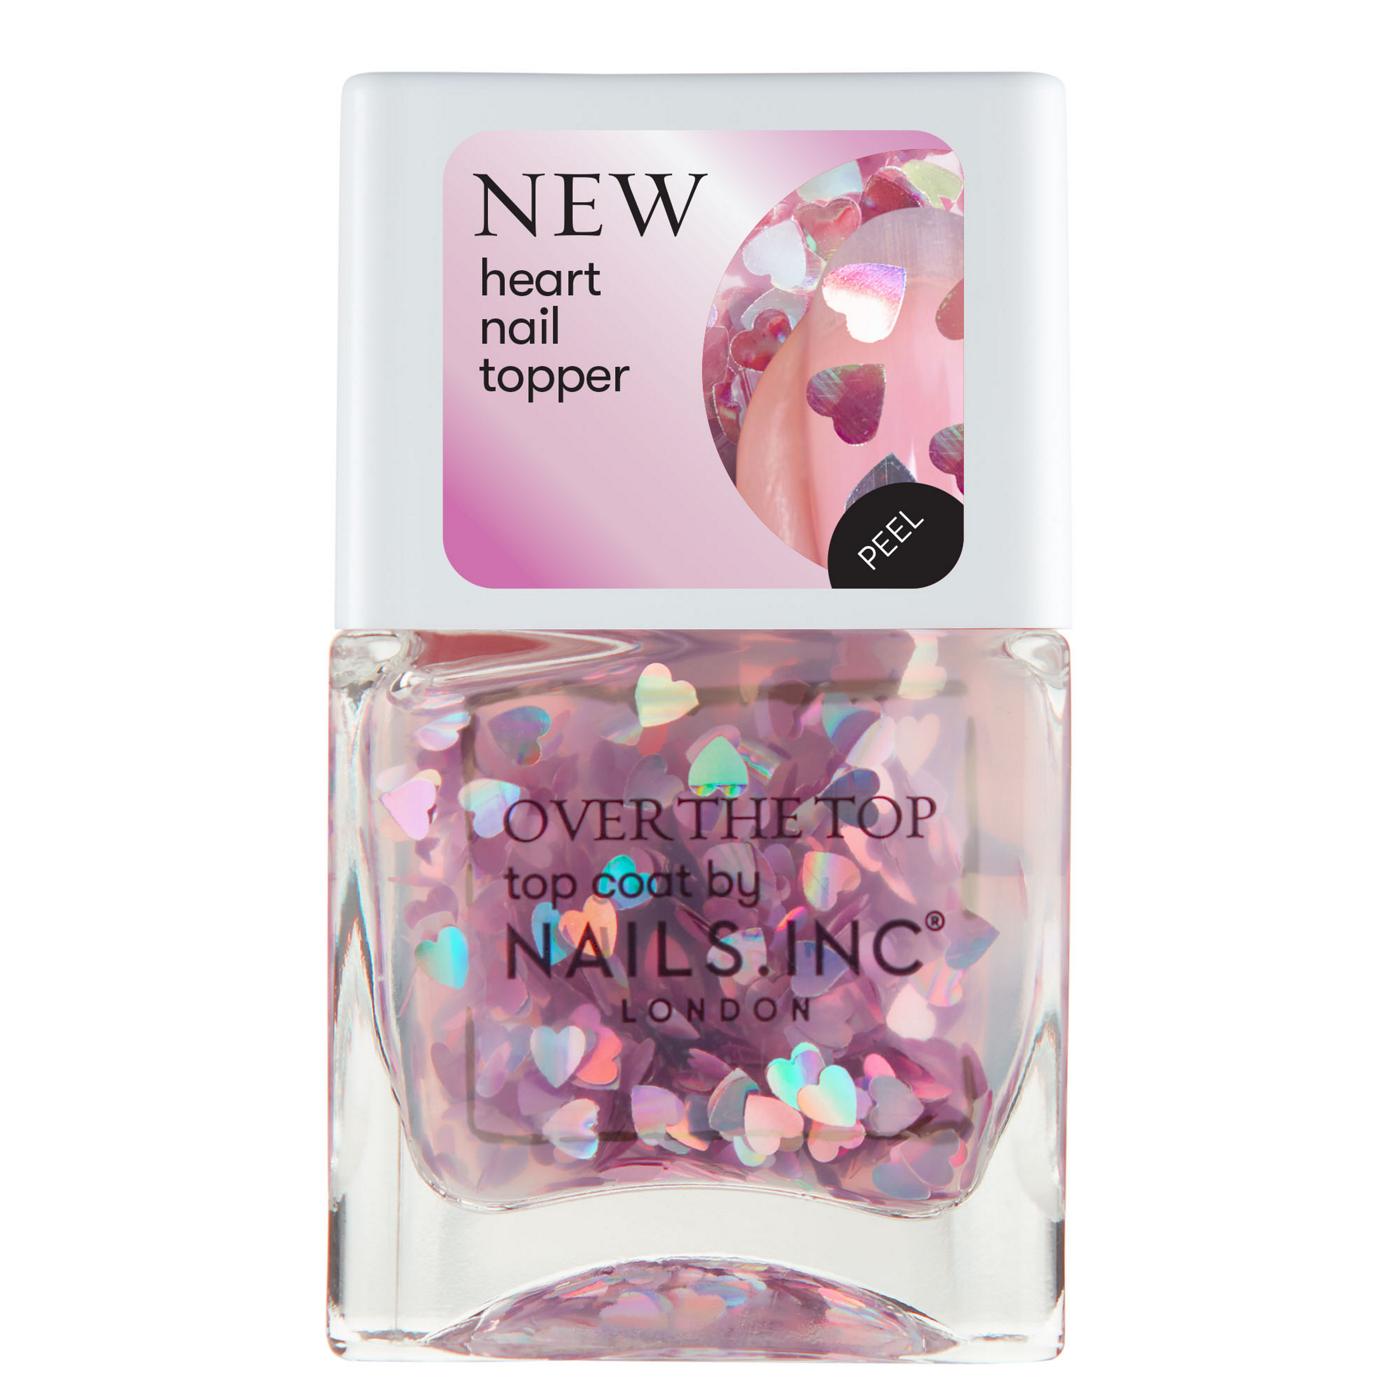 Nails.INC Heart Topper Nail Polish - Romancing In Regents Park; image 1 of 3